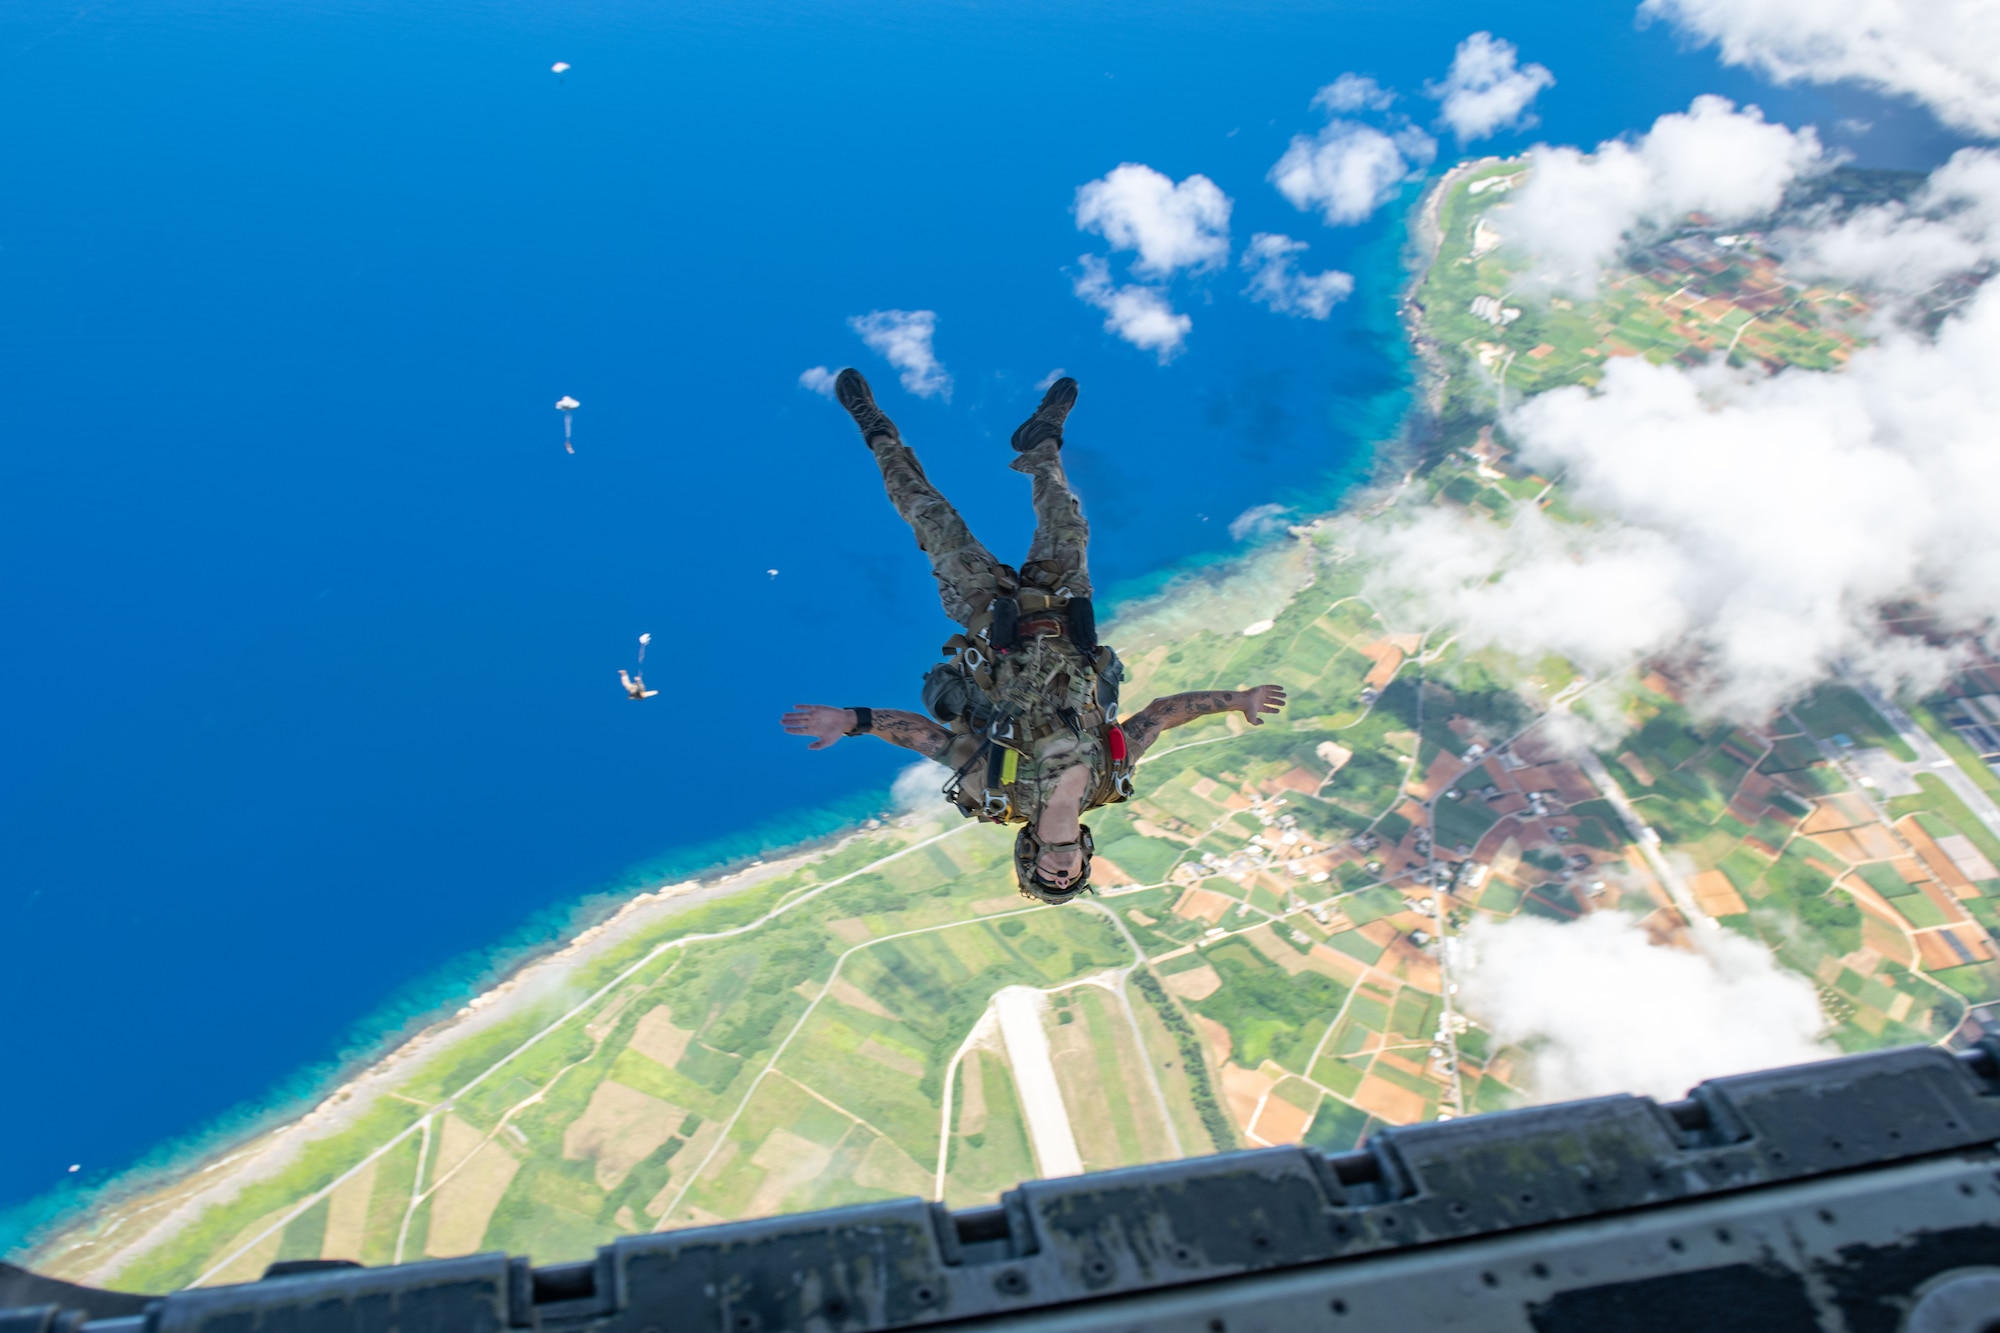 A Navy member does a backflip midair during a freefall above the coast of Japan.